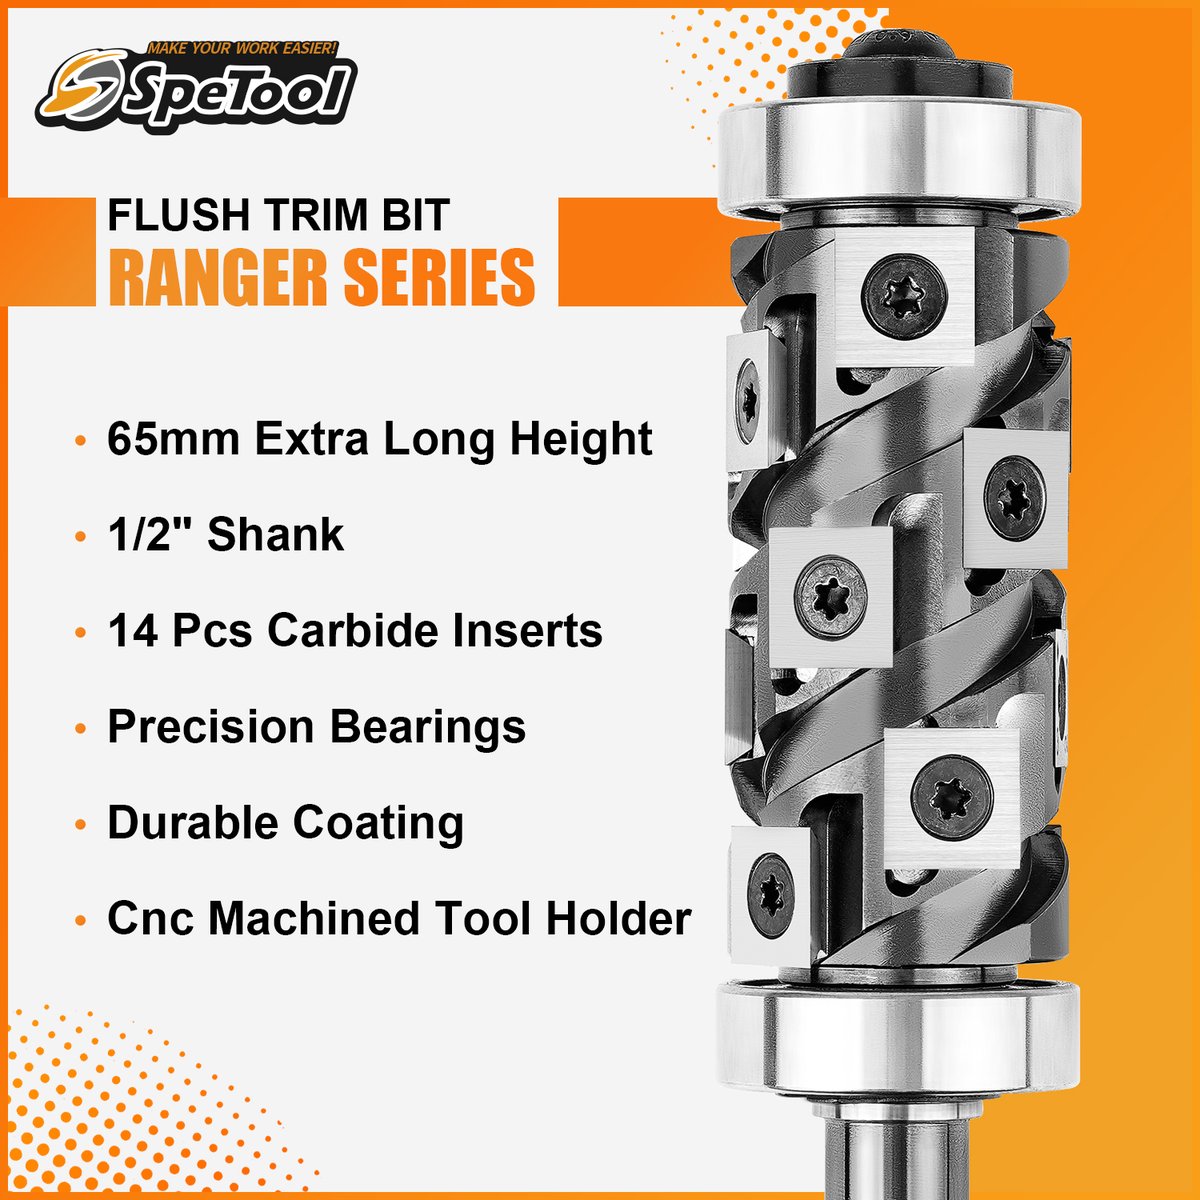 Introducing the new powerhouse: Ranger Series W07020 Insert Flush Trim Bits! Unleash precision and efficiency with every cut. Upgrade your routing game today! 🛠️✨ #RangerSeries #TrimBits #PrecisionTools #SpeTool